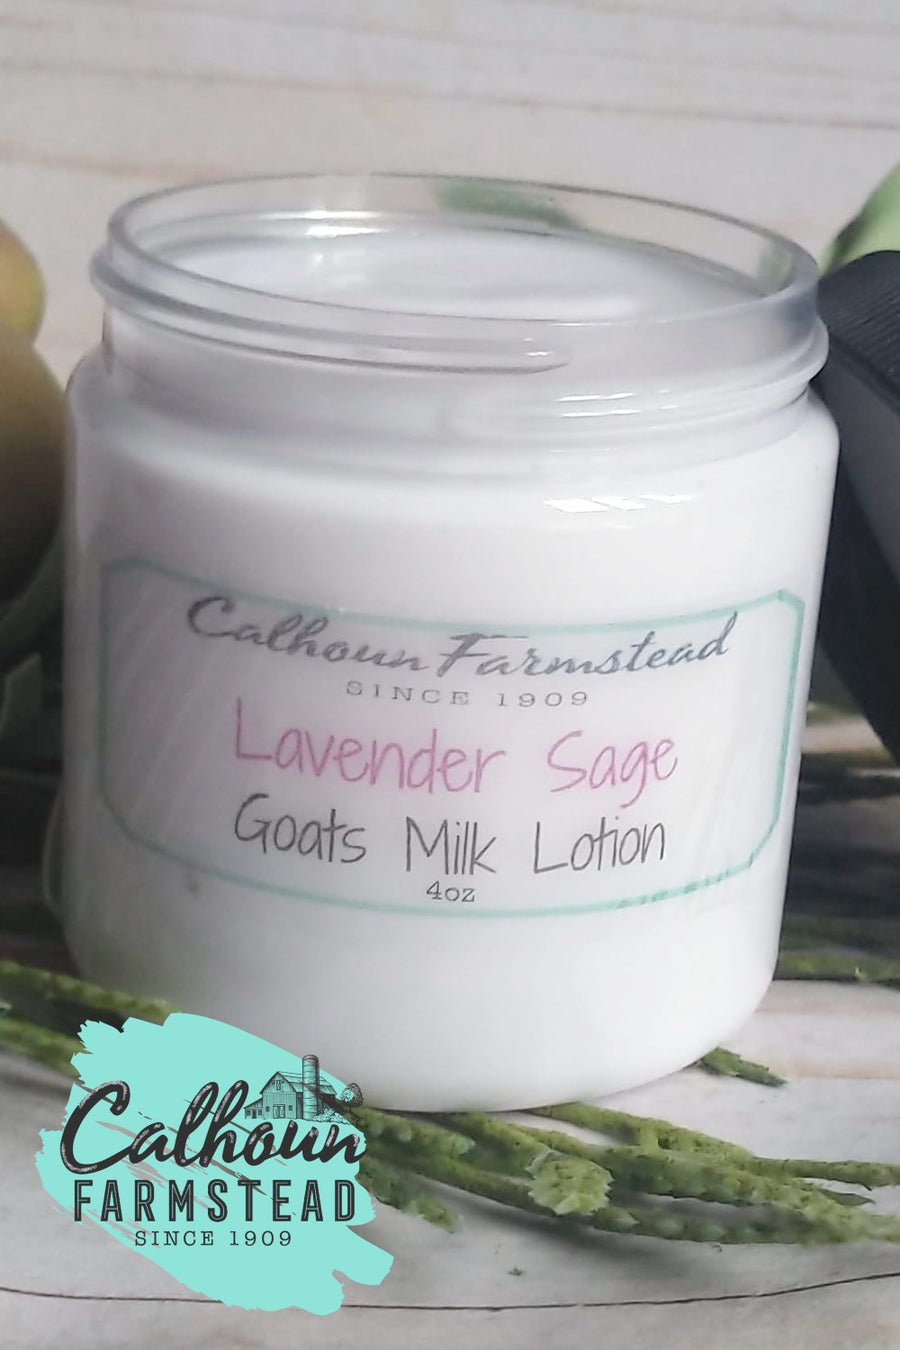 Lavender sage essential oils. Goats milk lotions made with natural ingredients. Herbal scents.